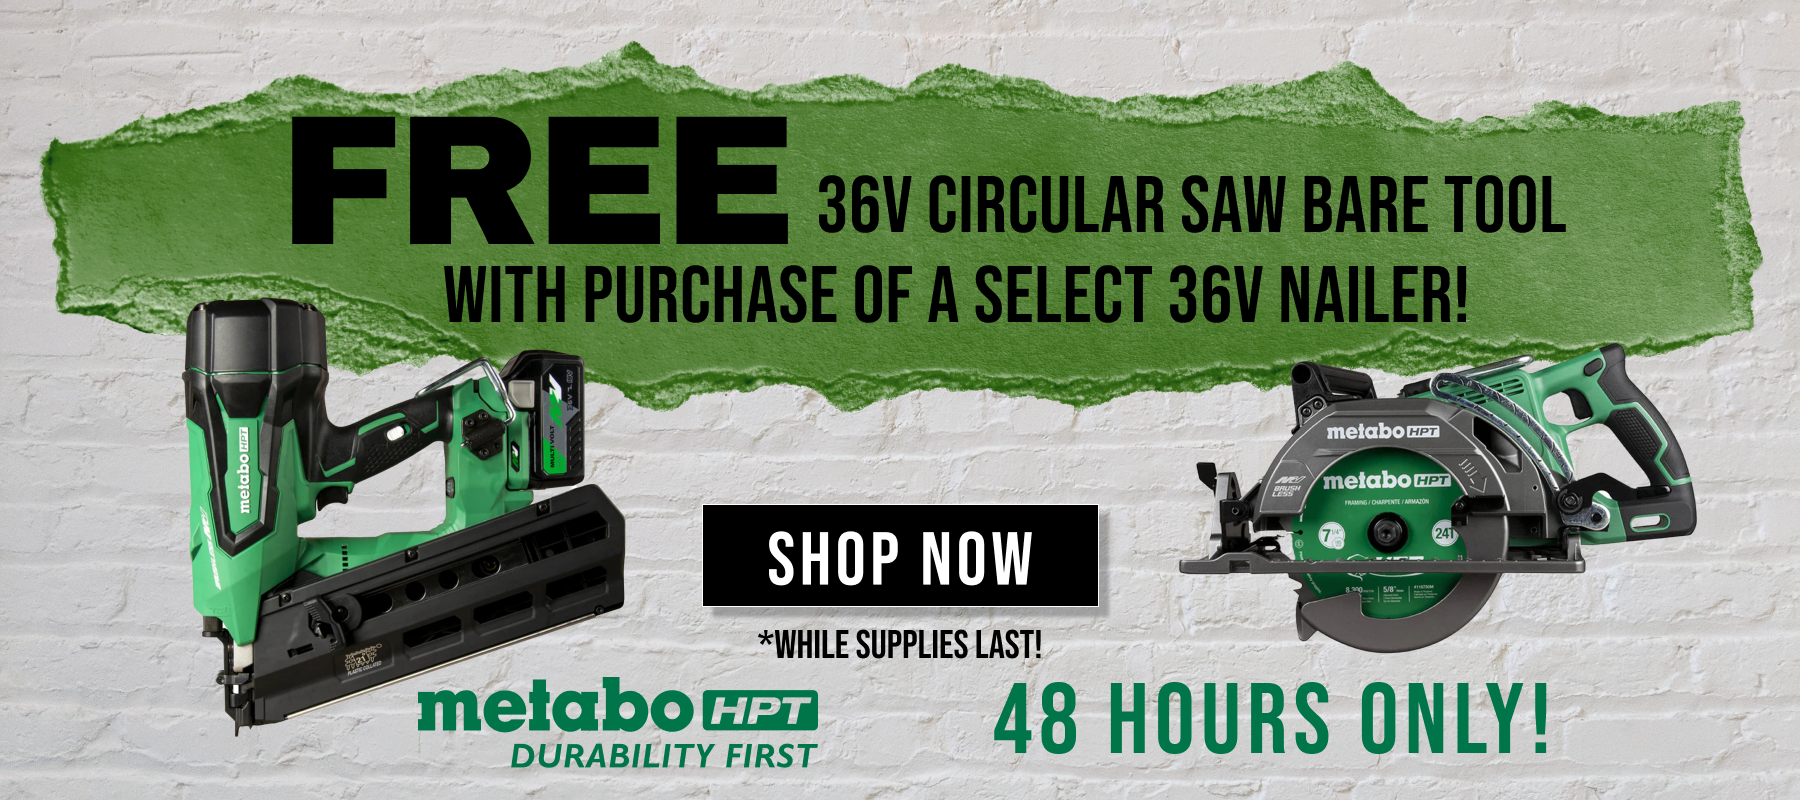 Metabo HPT // FREE 36V Circular Saw Bare Tool With Purchase of a Select 36V Nailer! // 48 Hours Only! // While Supplies Last! // SHOP NOW